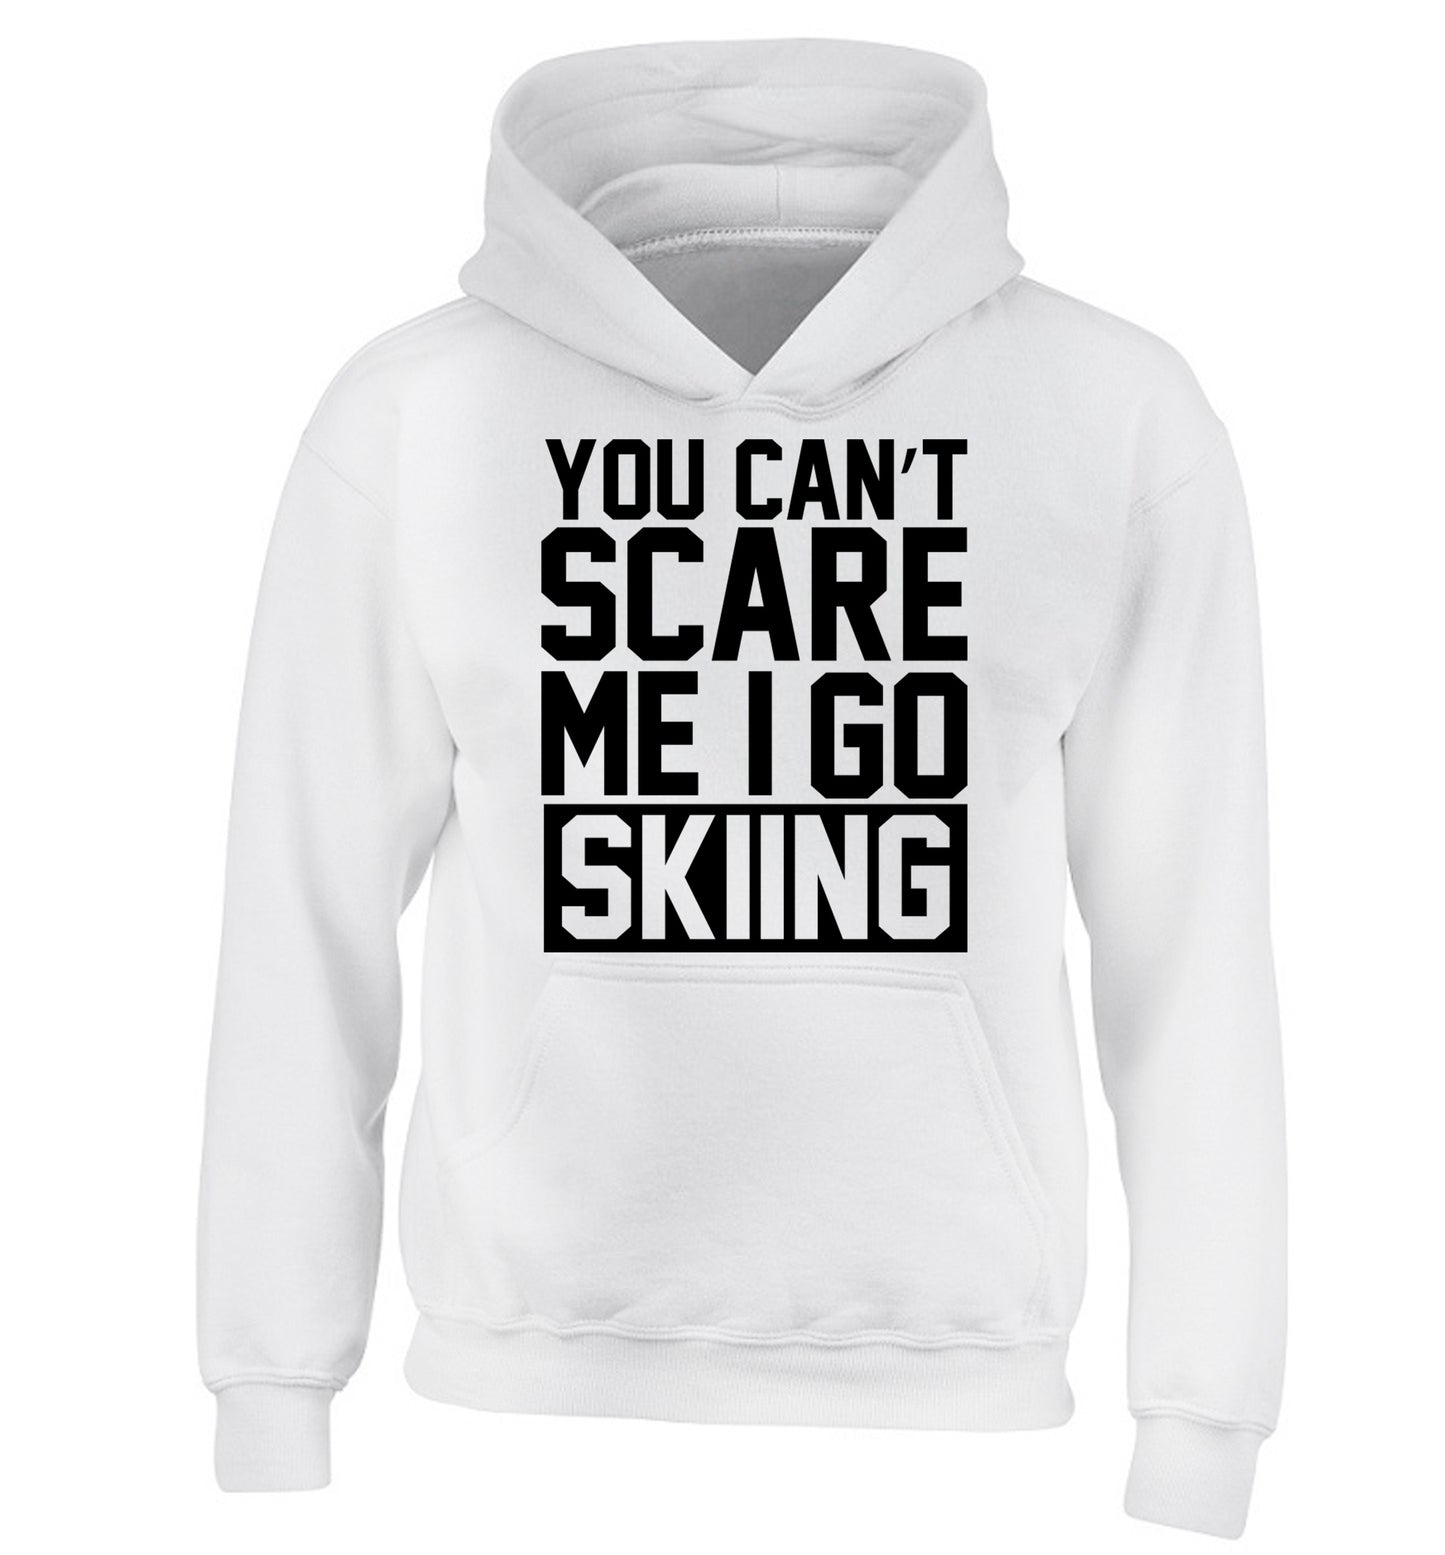 You can't scare me I go skiing children's white hoodie 12-14 Years